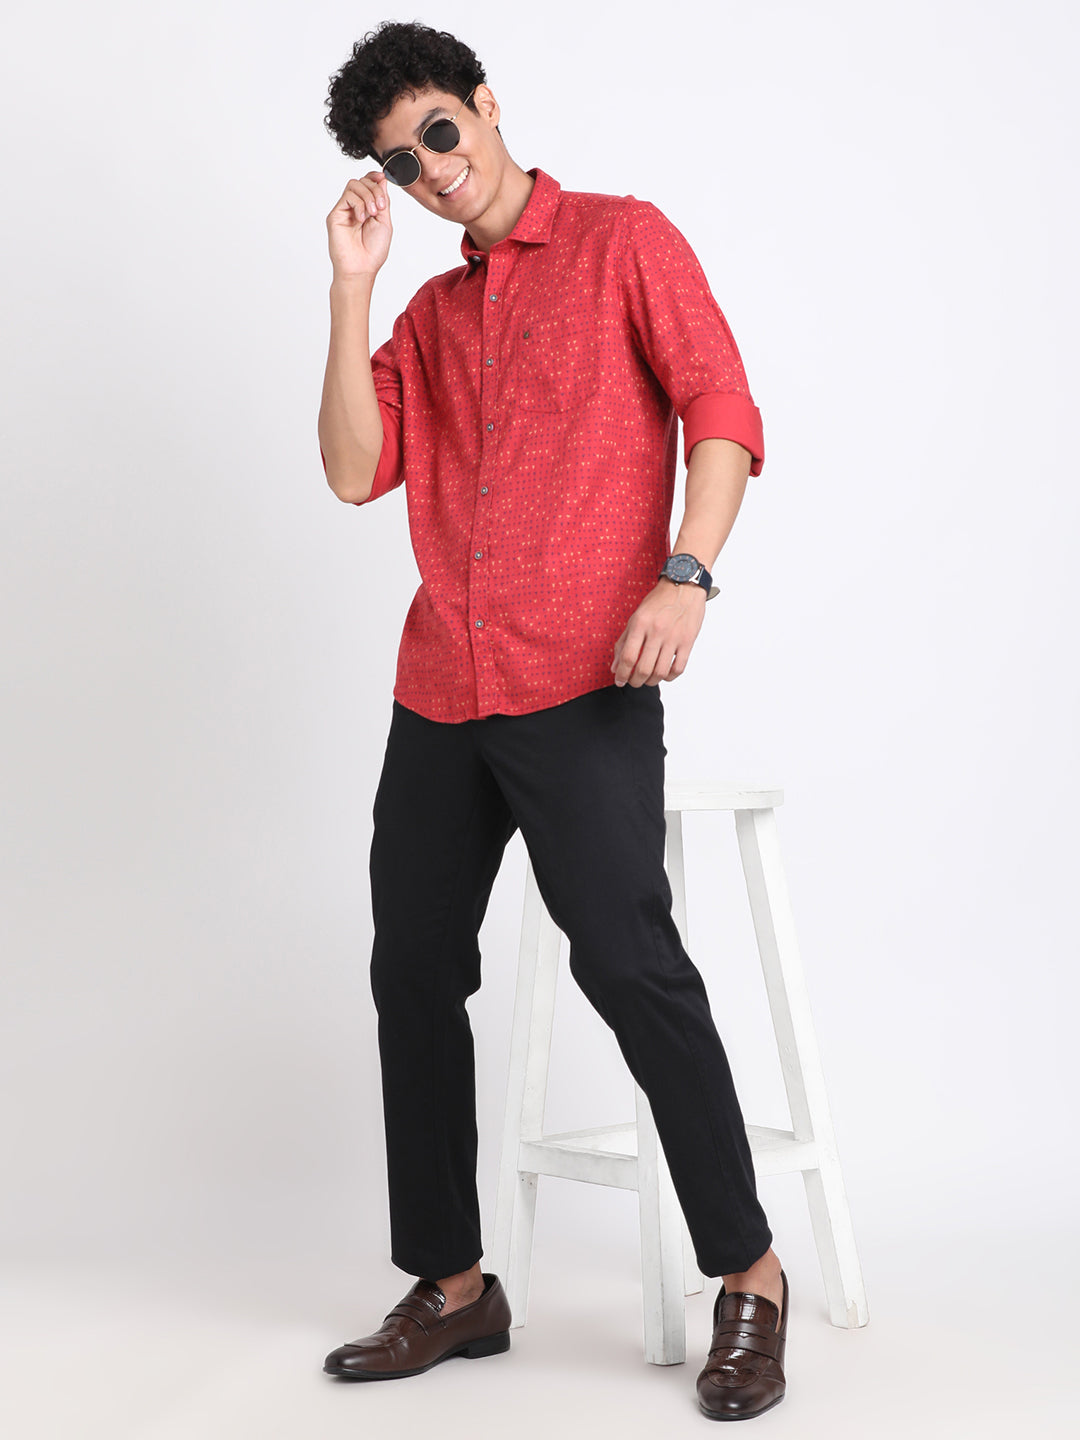 Cotton Lyocell Red Printed Slim Fit Full Sleeve Casual Shirt